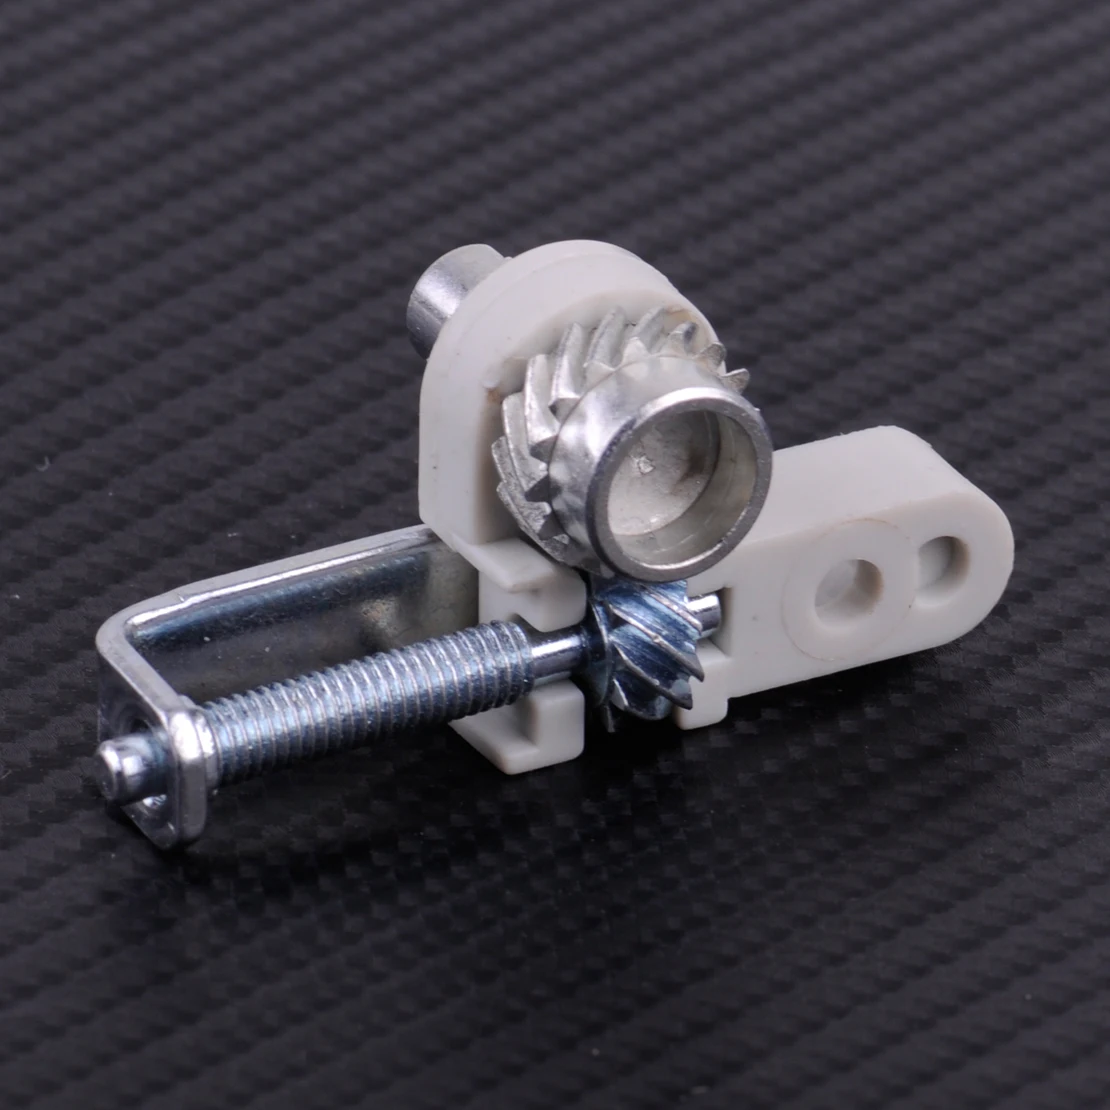 

LETAOSK New Chainsaw Chain Adjuster Tensioner Adjustment Screw fit for Stihl 021 023 025 MS210 MS230 MS250 Chainsaw